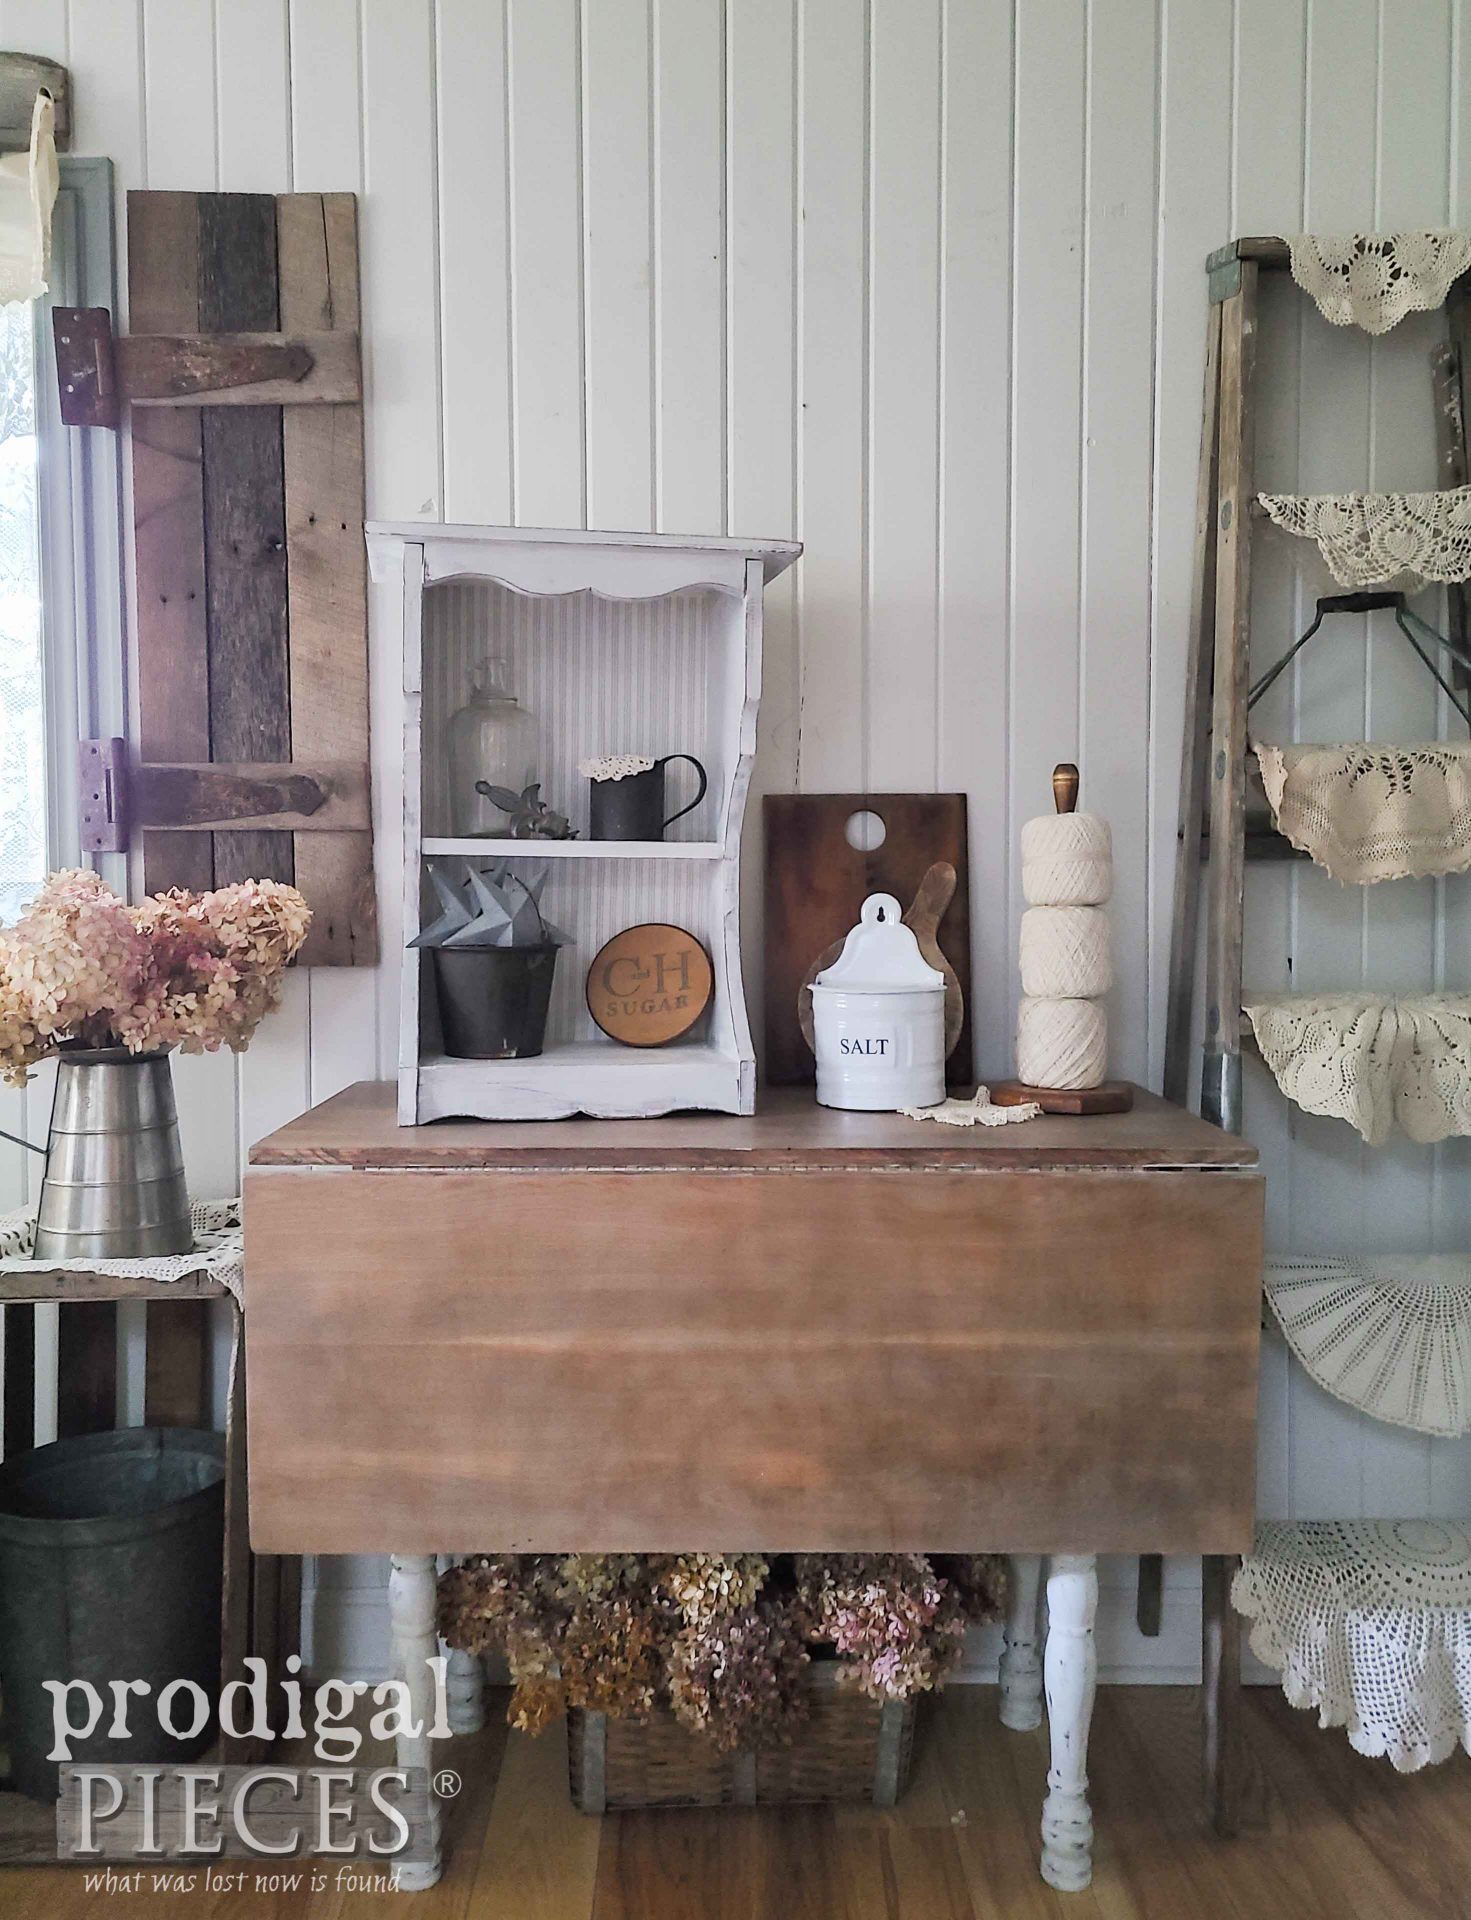 Farmhouse Style Wooden Shelf Updated with Paint and Paper by Larissa of Prodigal Pieces | prodigalpieces.com #prodigalpieces #farmhouse #upcycled